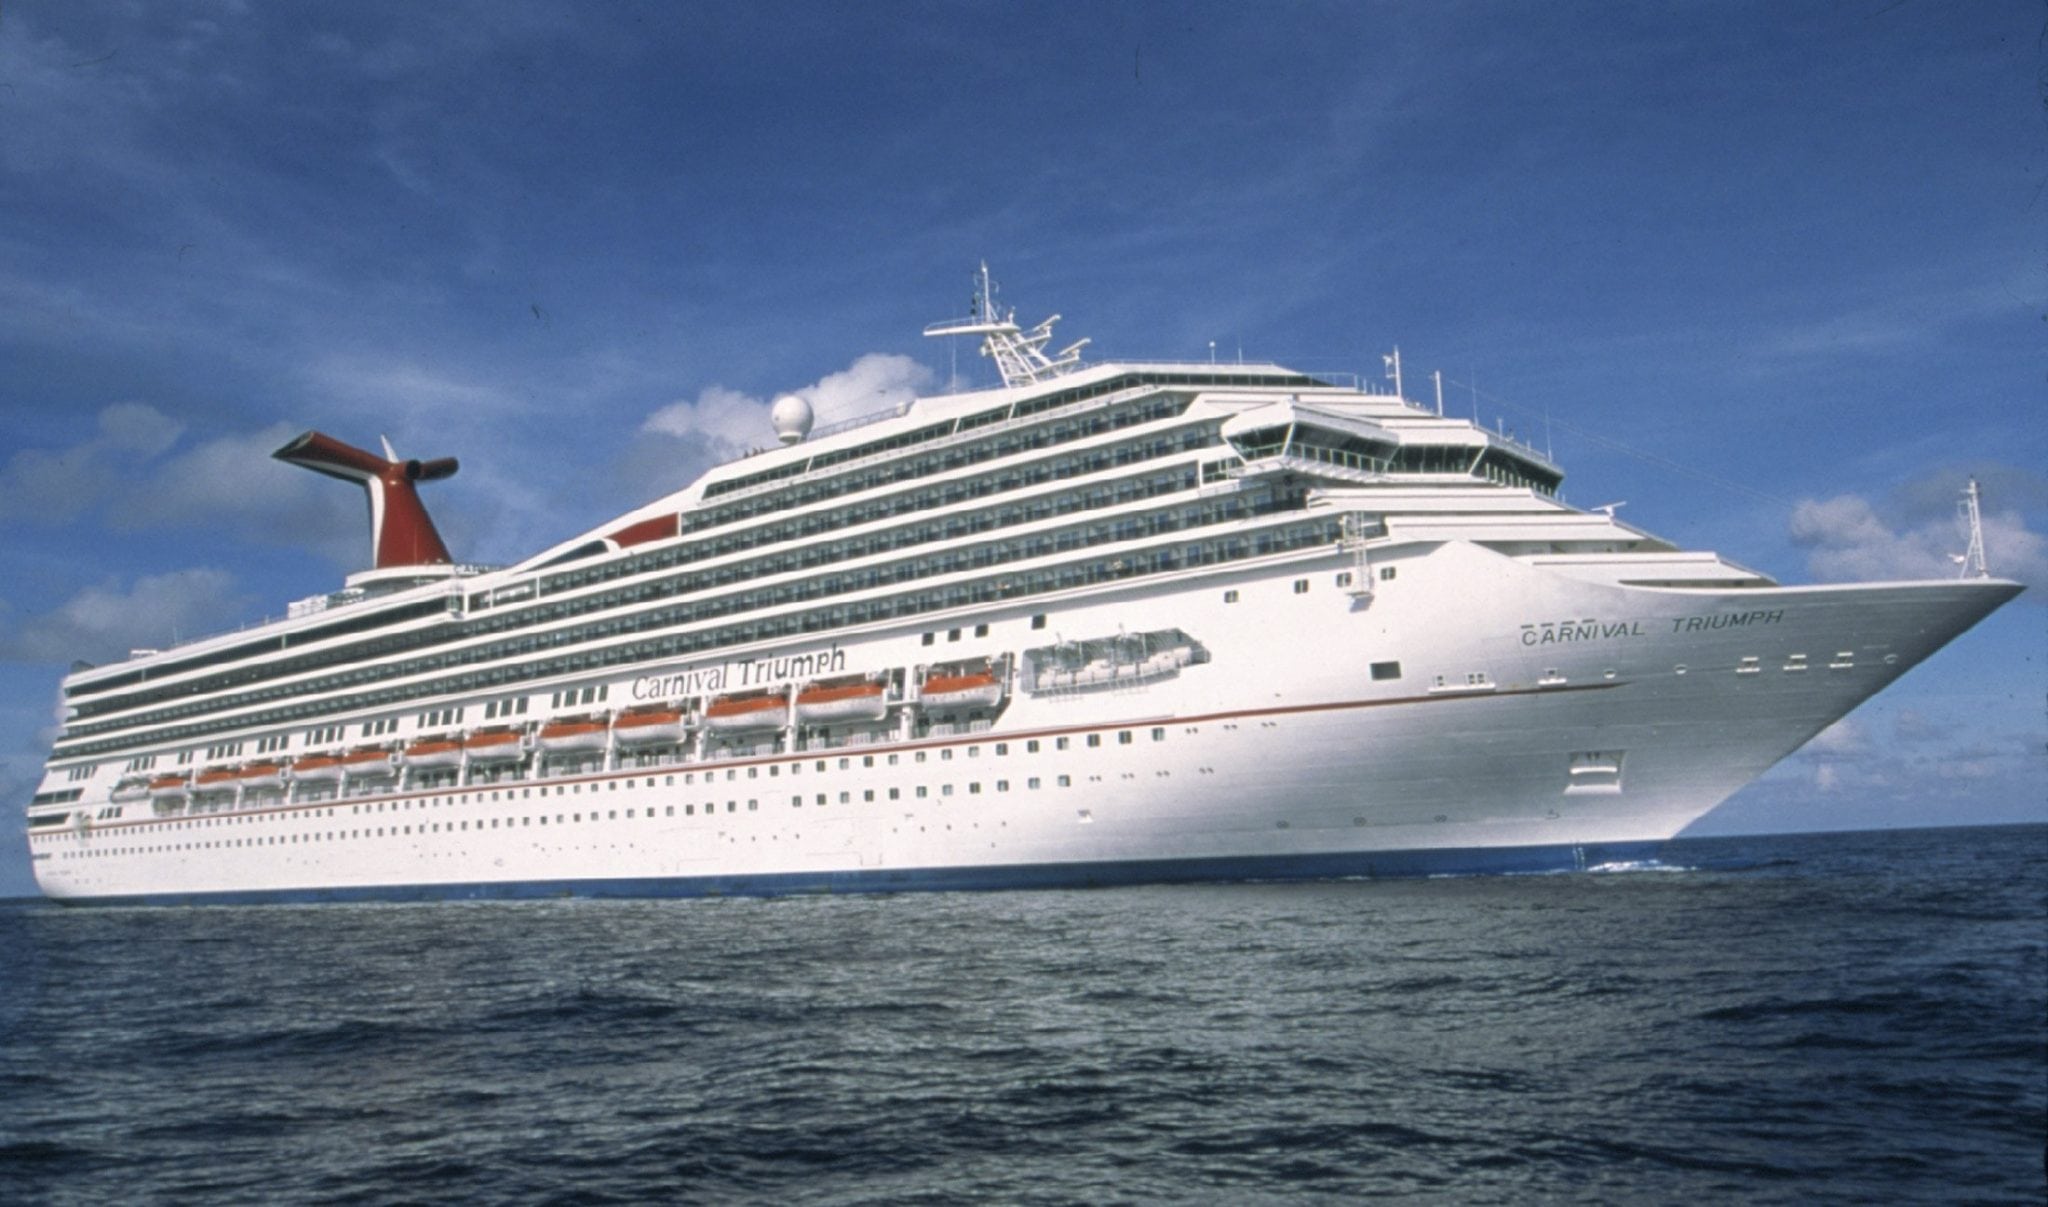 Carnival cruise ship, Carnival Triumph, is seen in this undated handout picture provided by Carnival Cruise Lines.